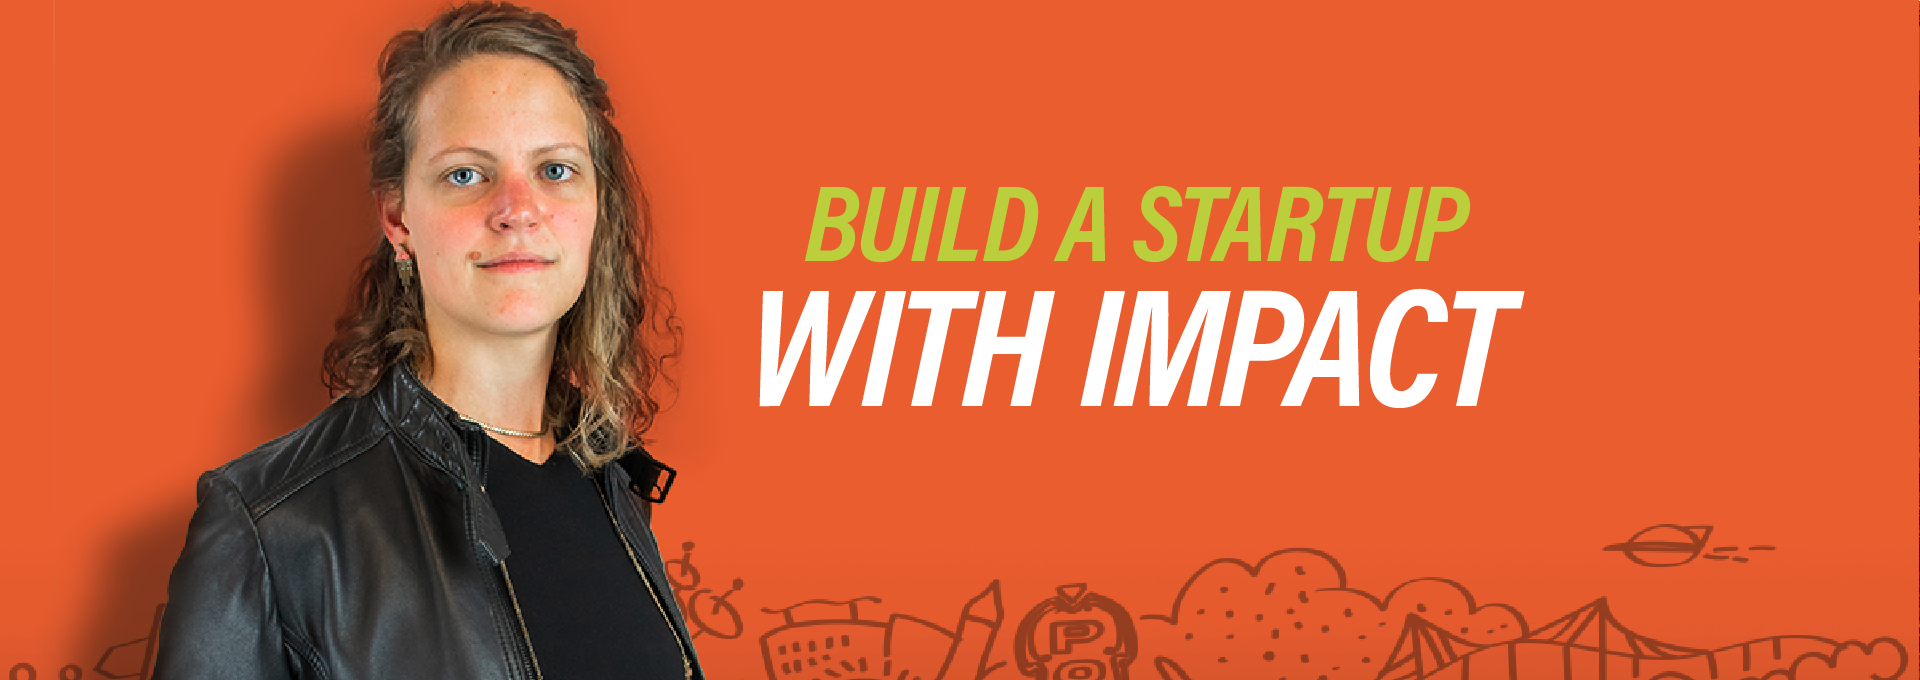 Build a Startup with impact banner